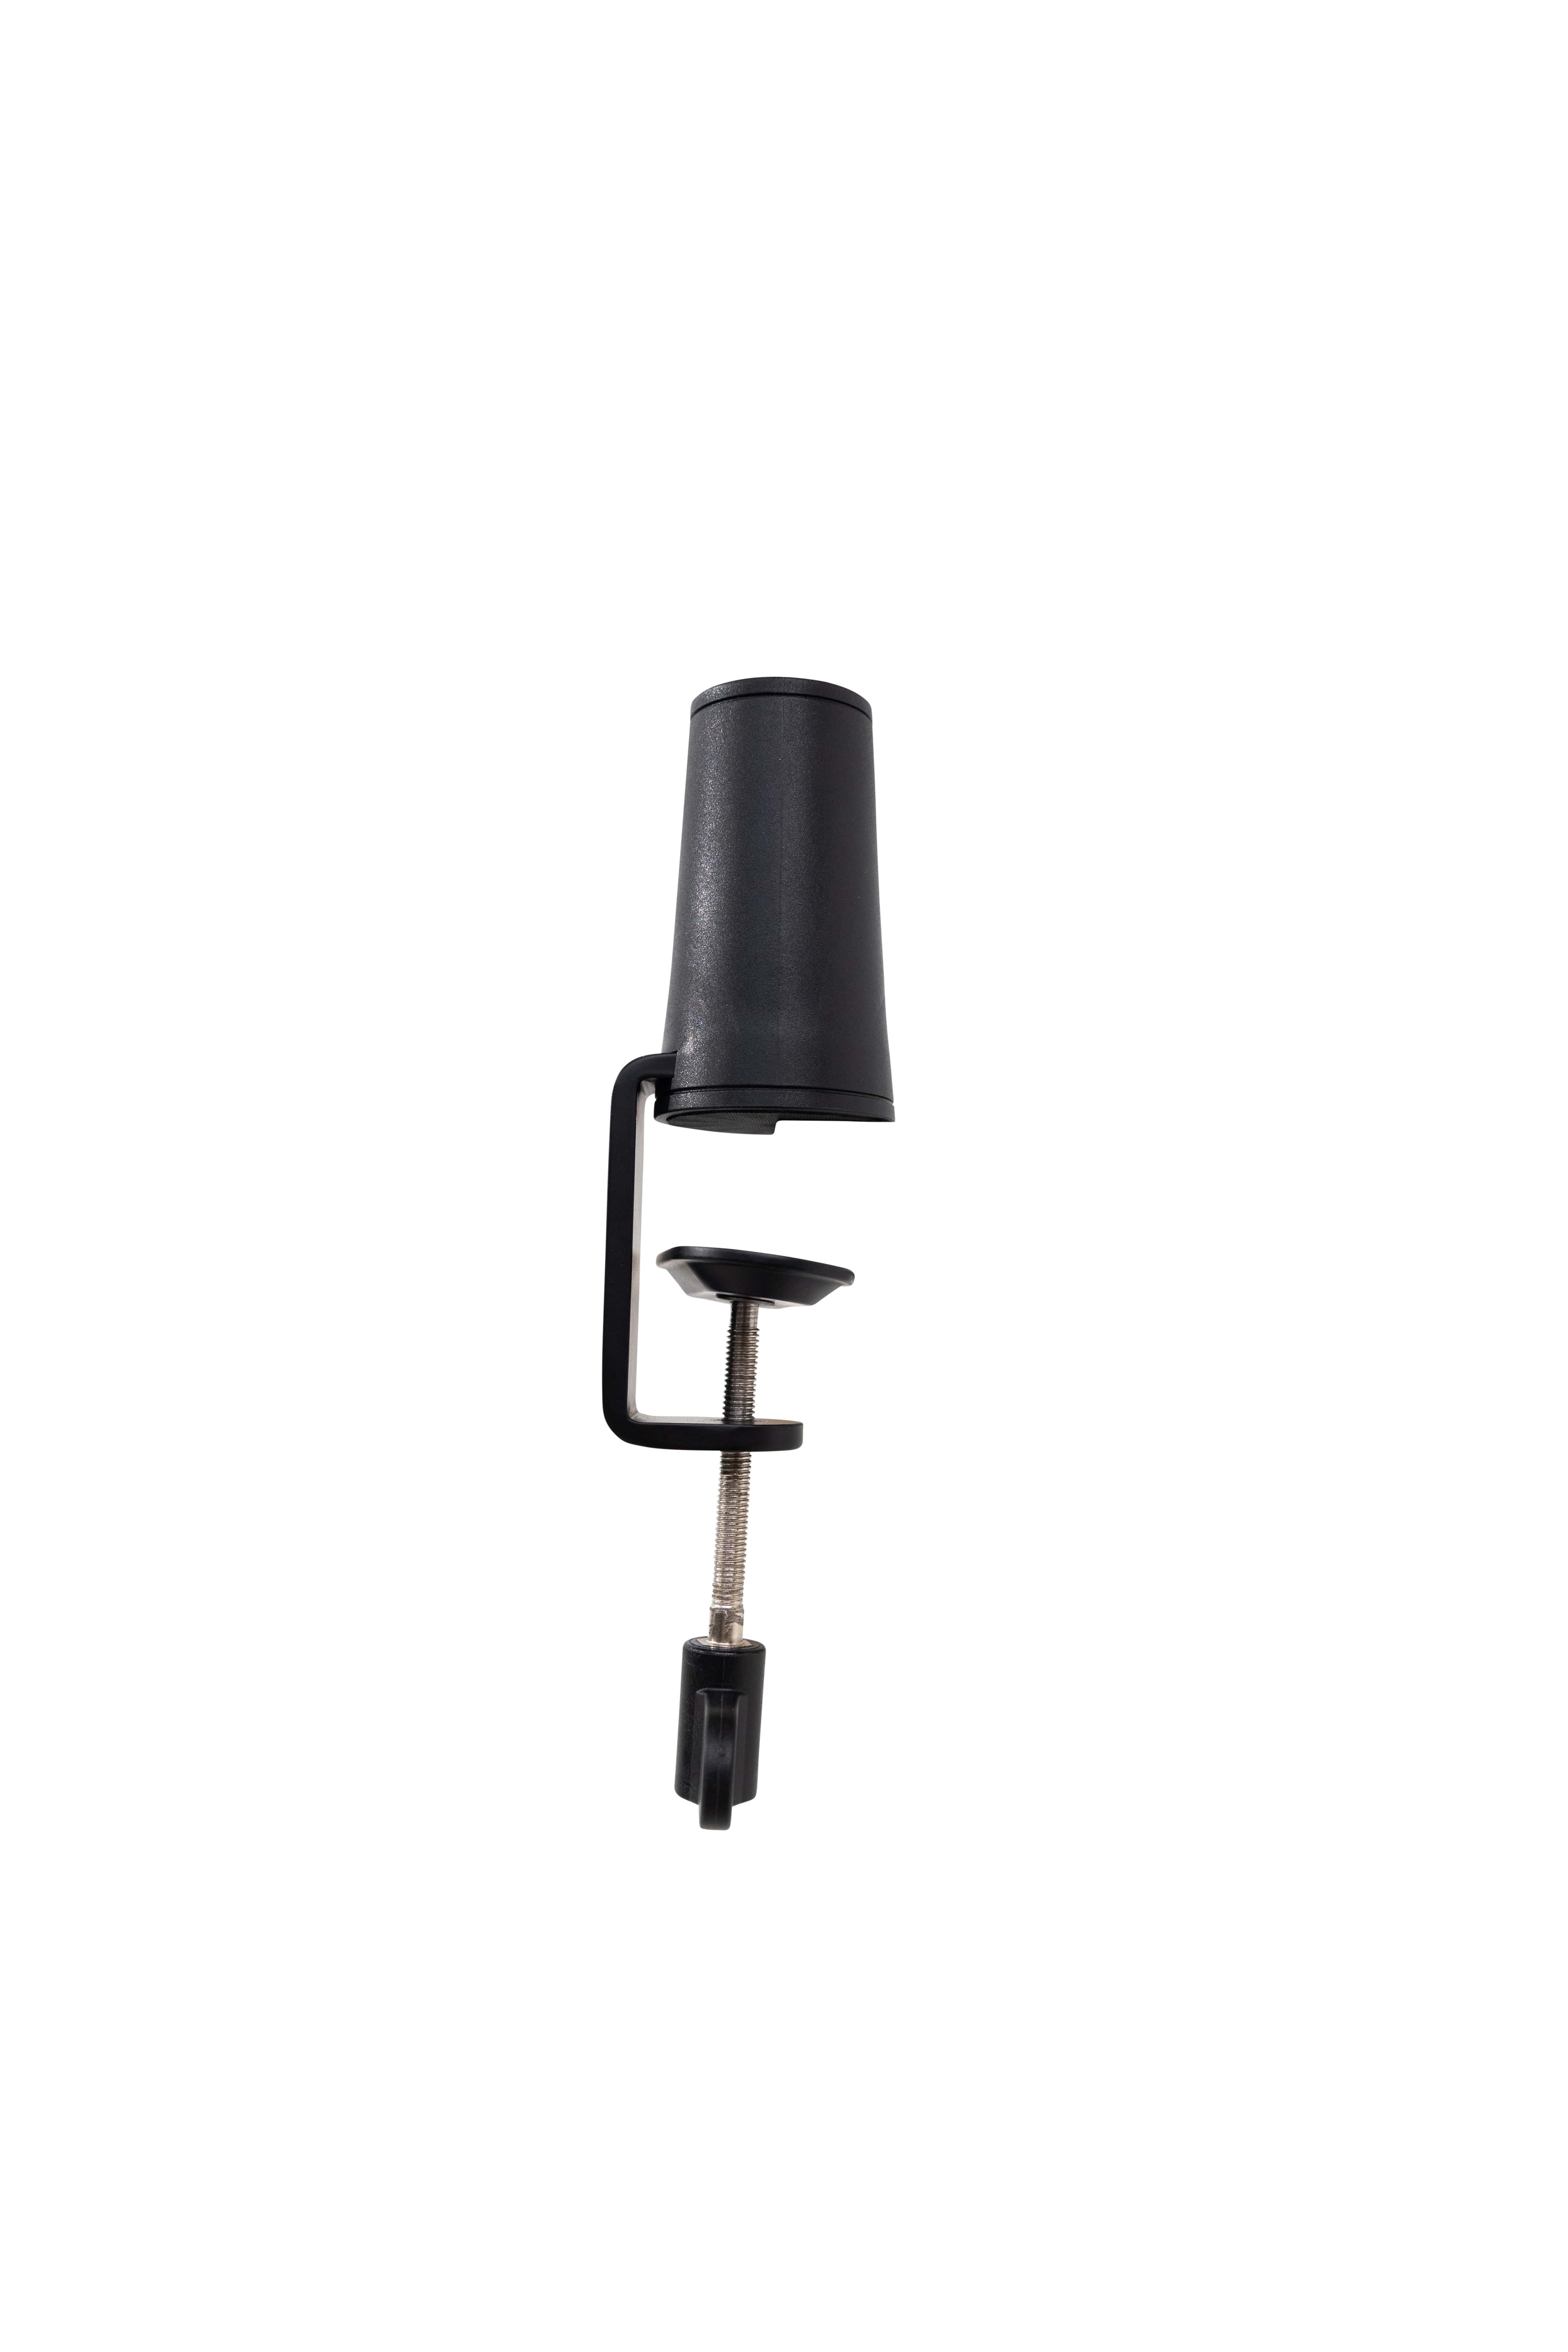 Gator Frameworks Bras Articule A Pince Deluxe Pour Micro - Microphone stand - Variation 12